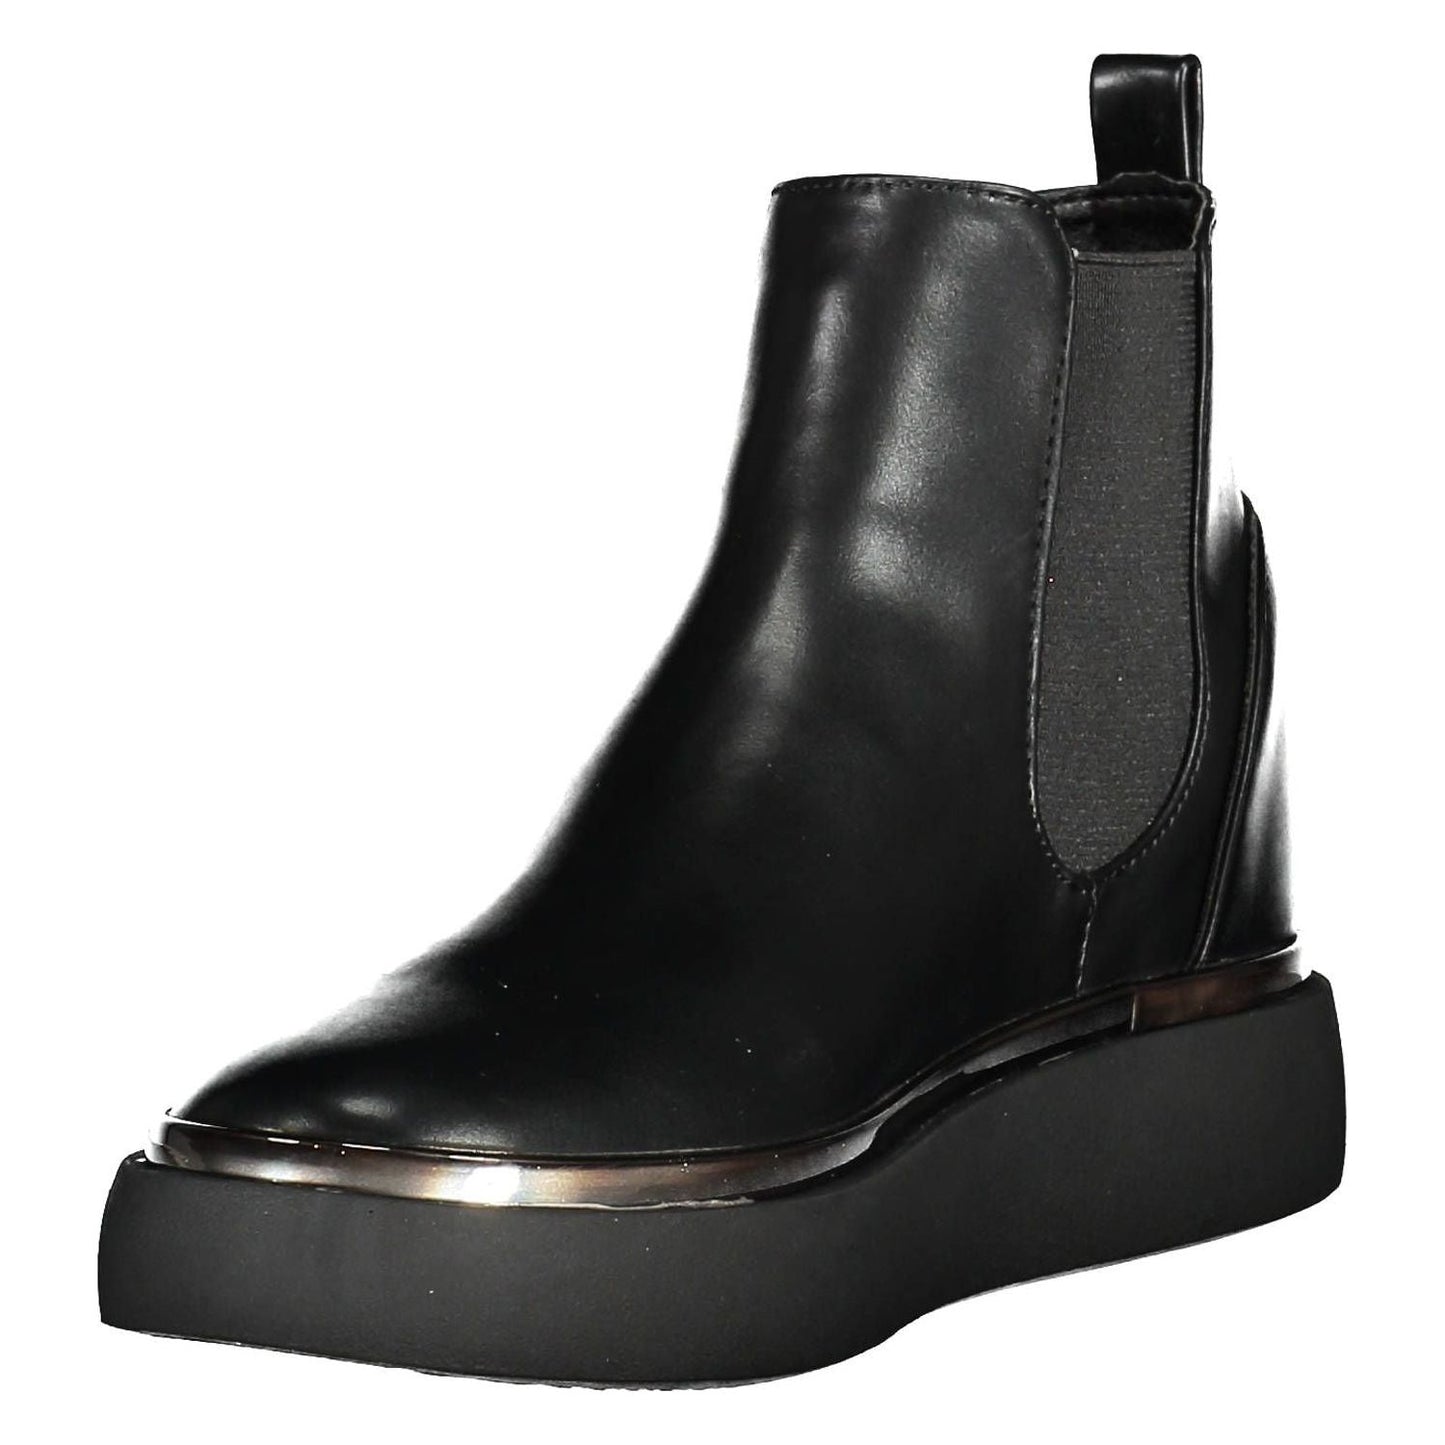 U.S. POLO ASSN. Chic Low Ankle Boot with Contrasting Details chic-low-ankle-boot-with-contrasting-details